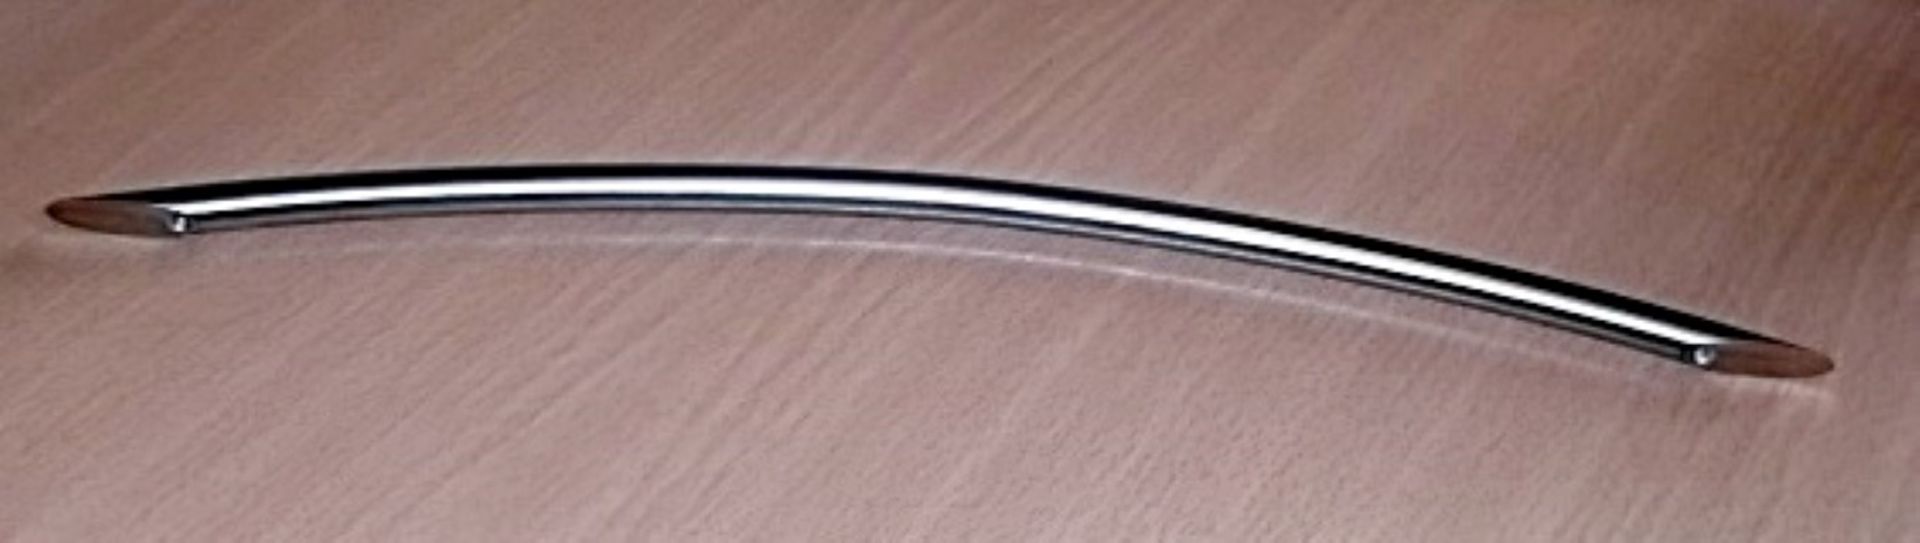 250 x BOW Handle Kitchen Door Handles - 320mm - New Stock - Brushed Nickel Finish - Fixings Included - Image 12 of 20